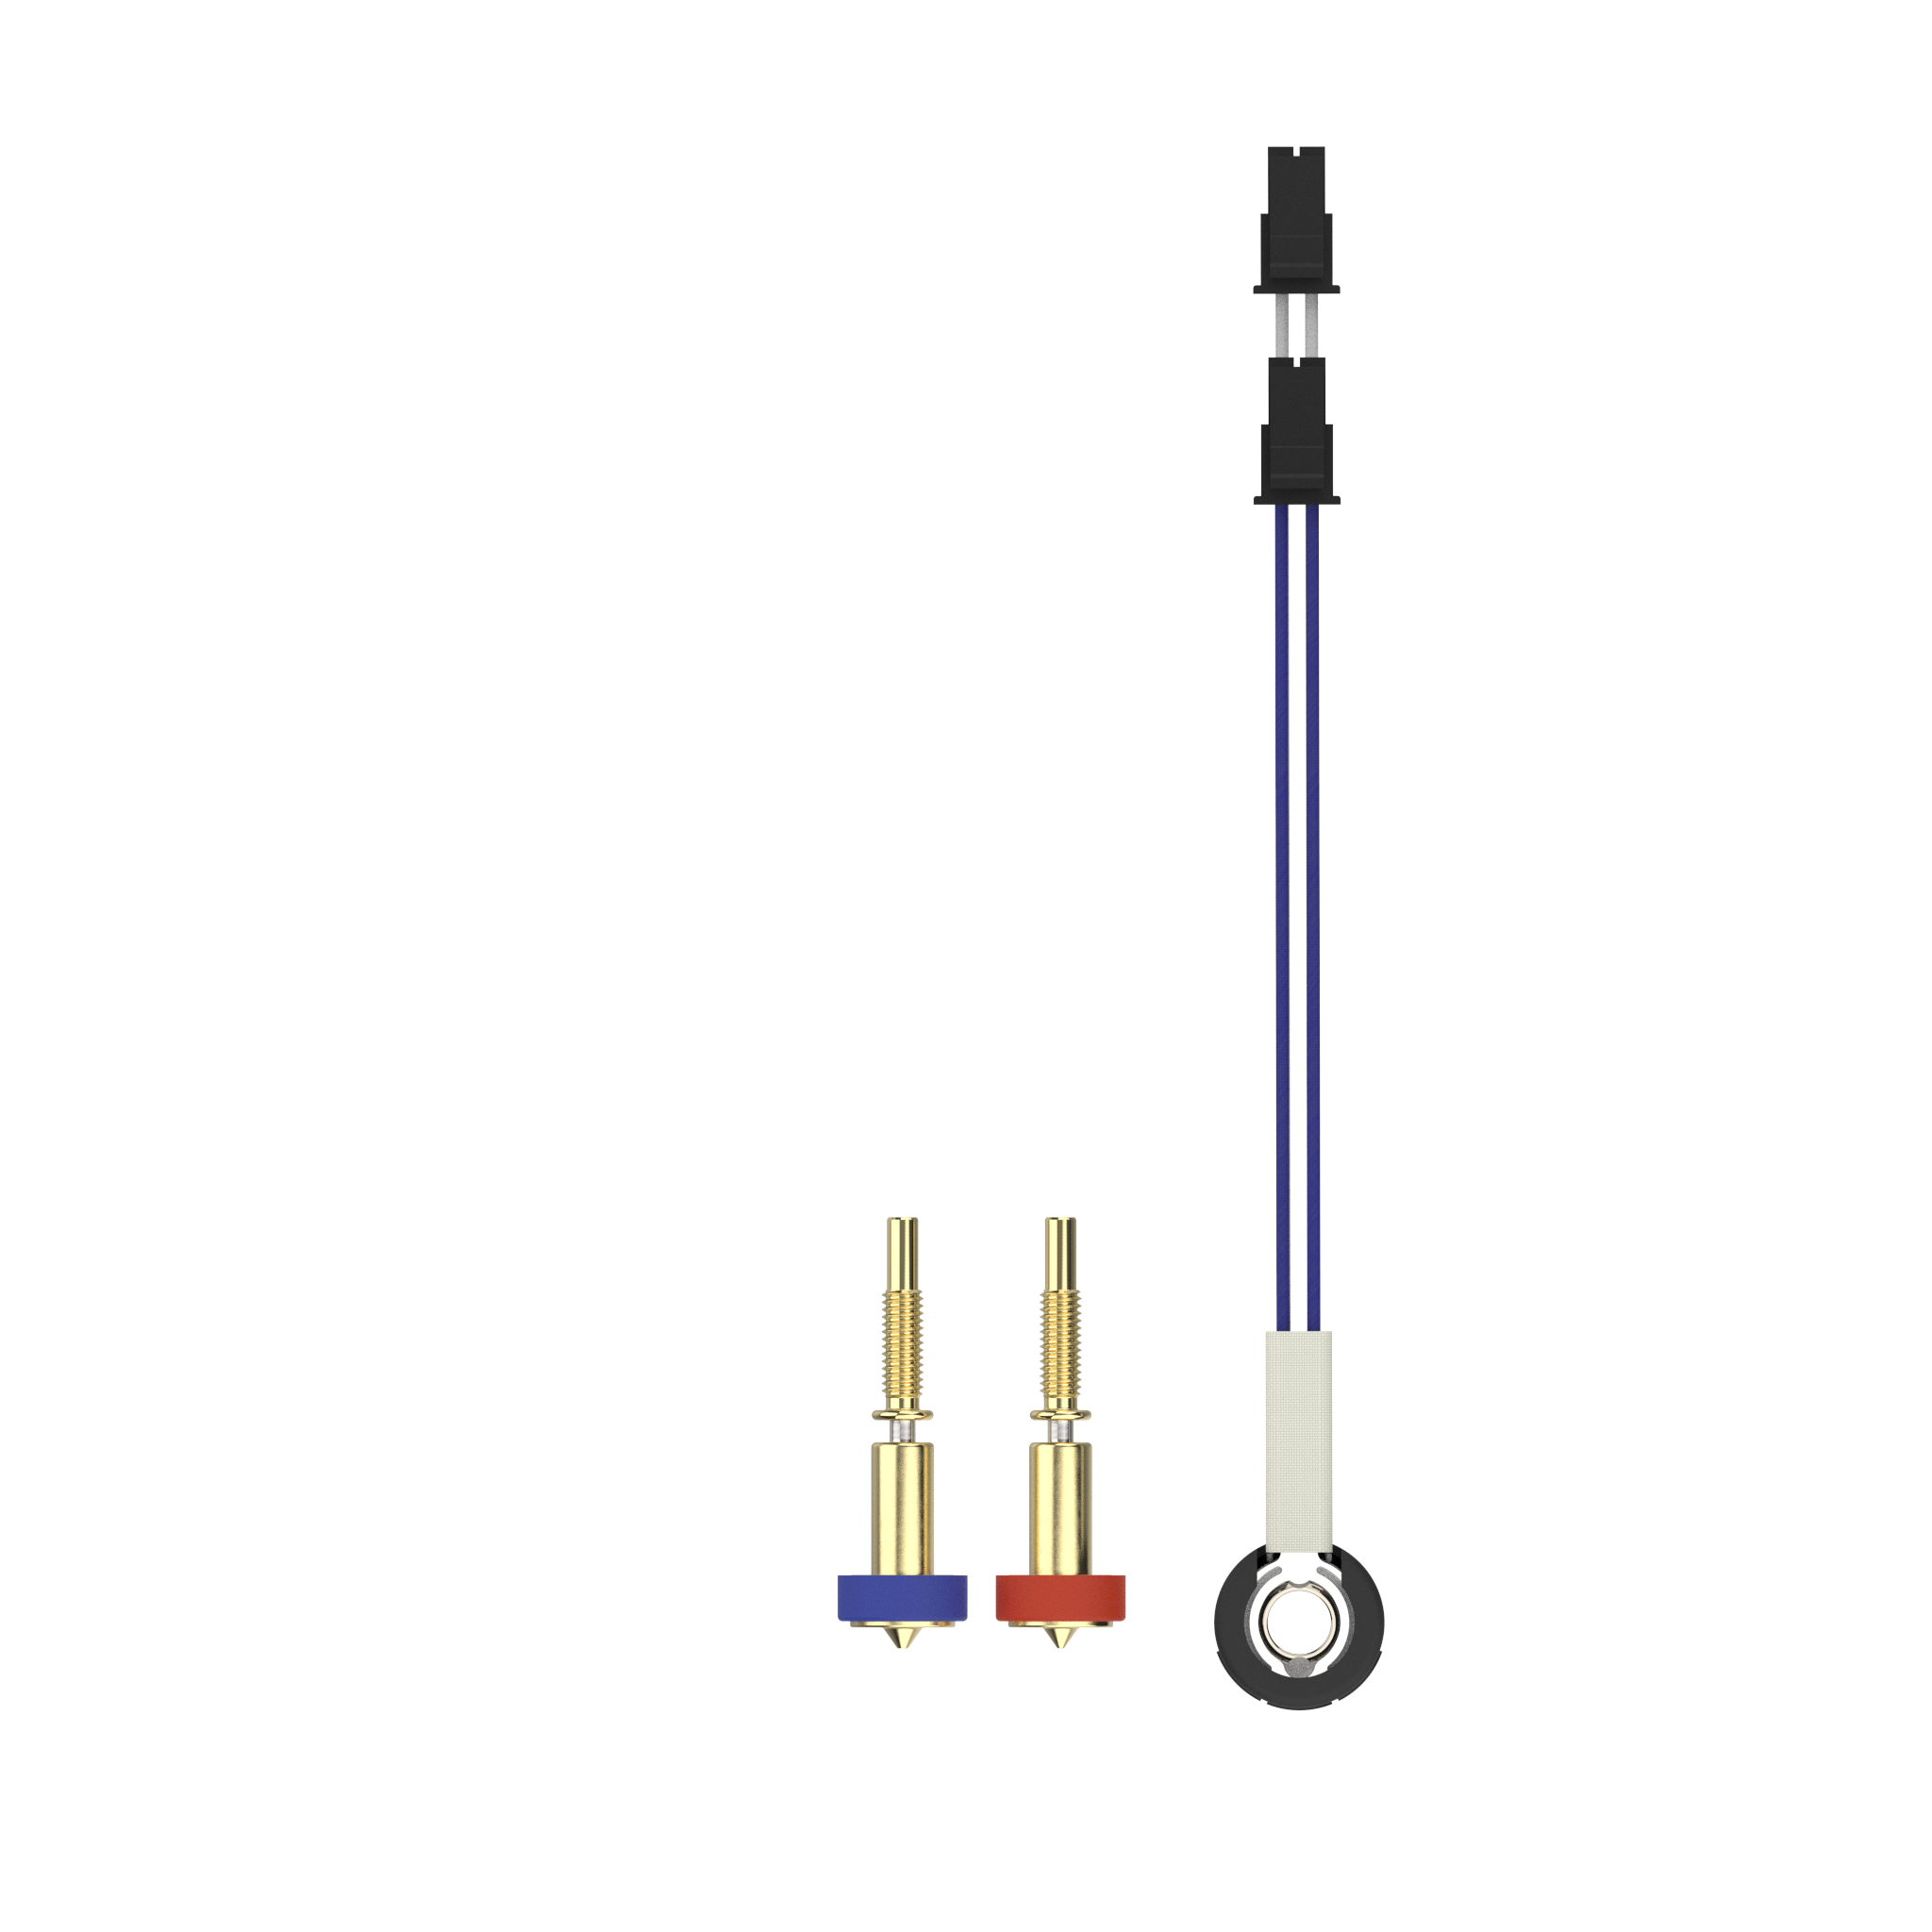 An image of an electronic component with two connectors: one has a blue base and the other has a red base. Both have gold-colored pins. The setup resembles an E3D Revo HotSide Starter Pack with a brass E3D nozzle. There is also a connected wire assembly with black connectors at both ends and a white ring near one end.